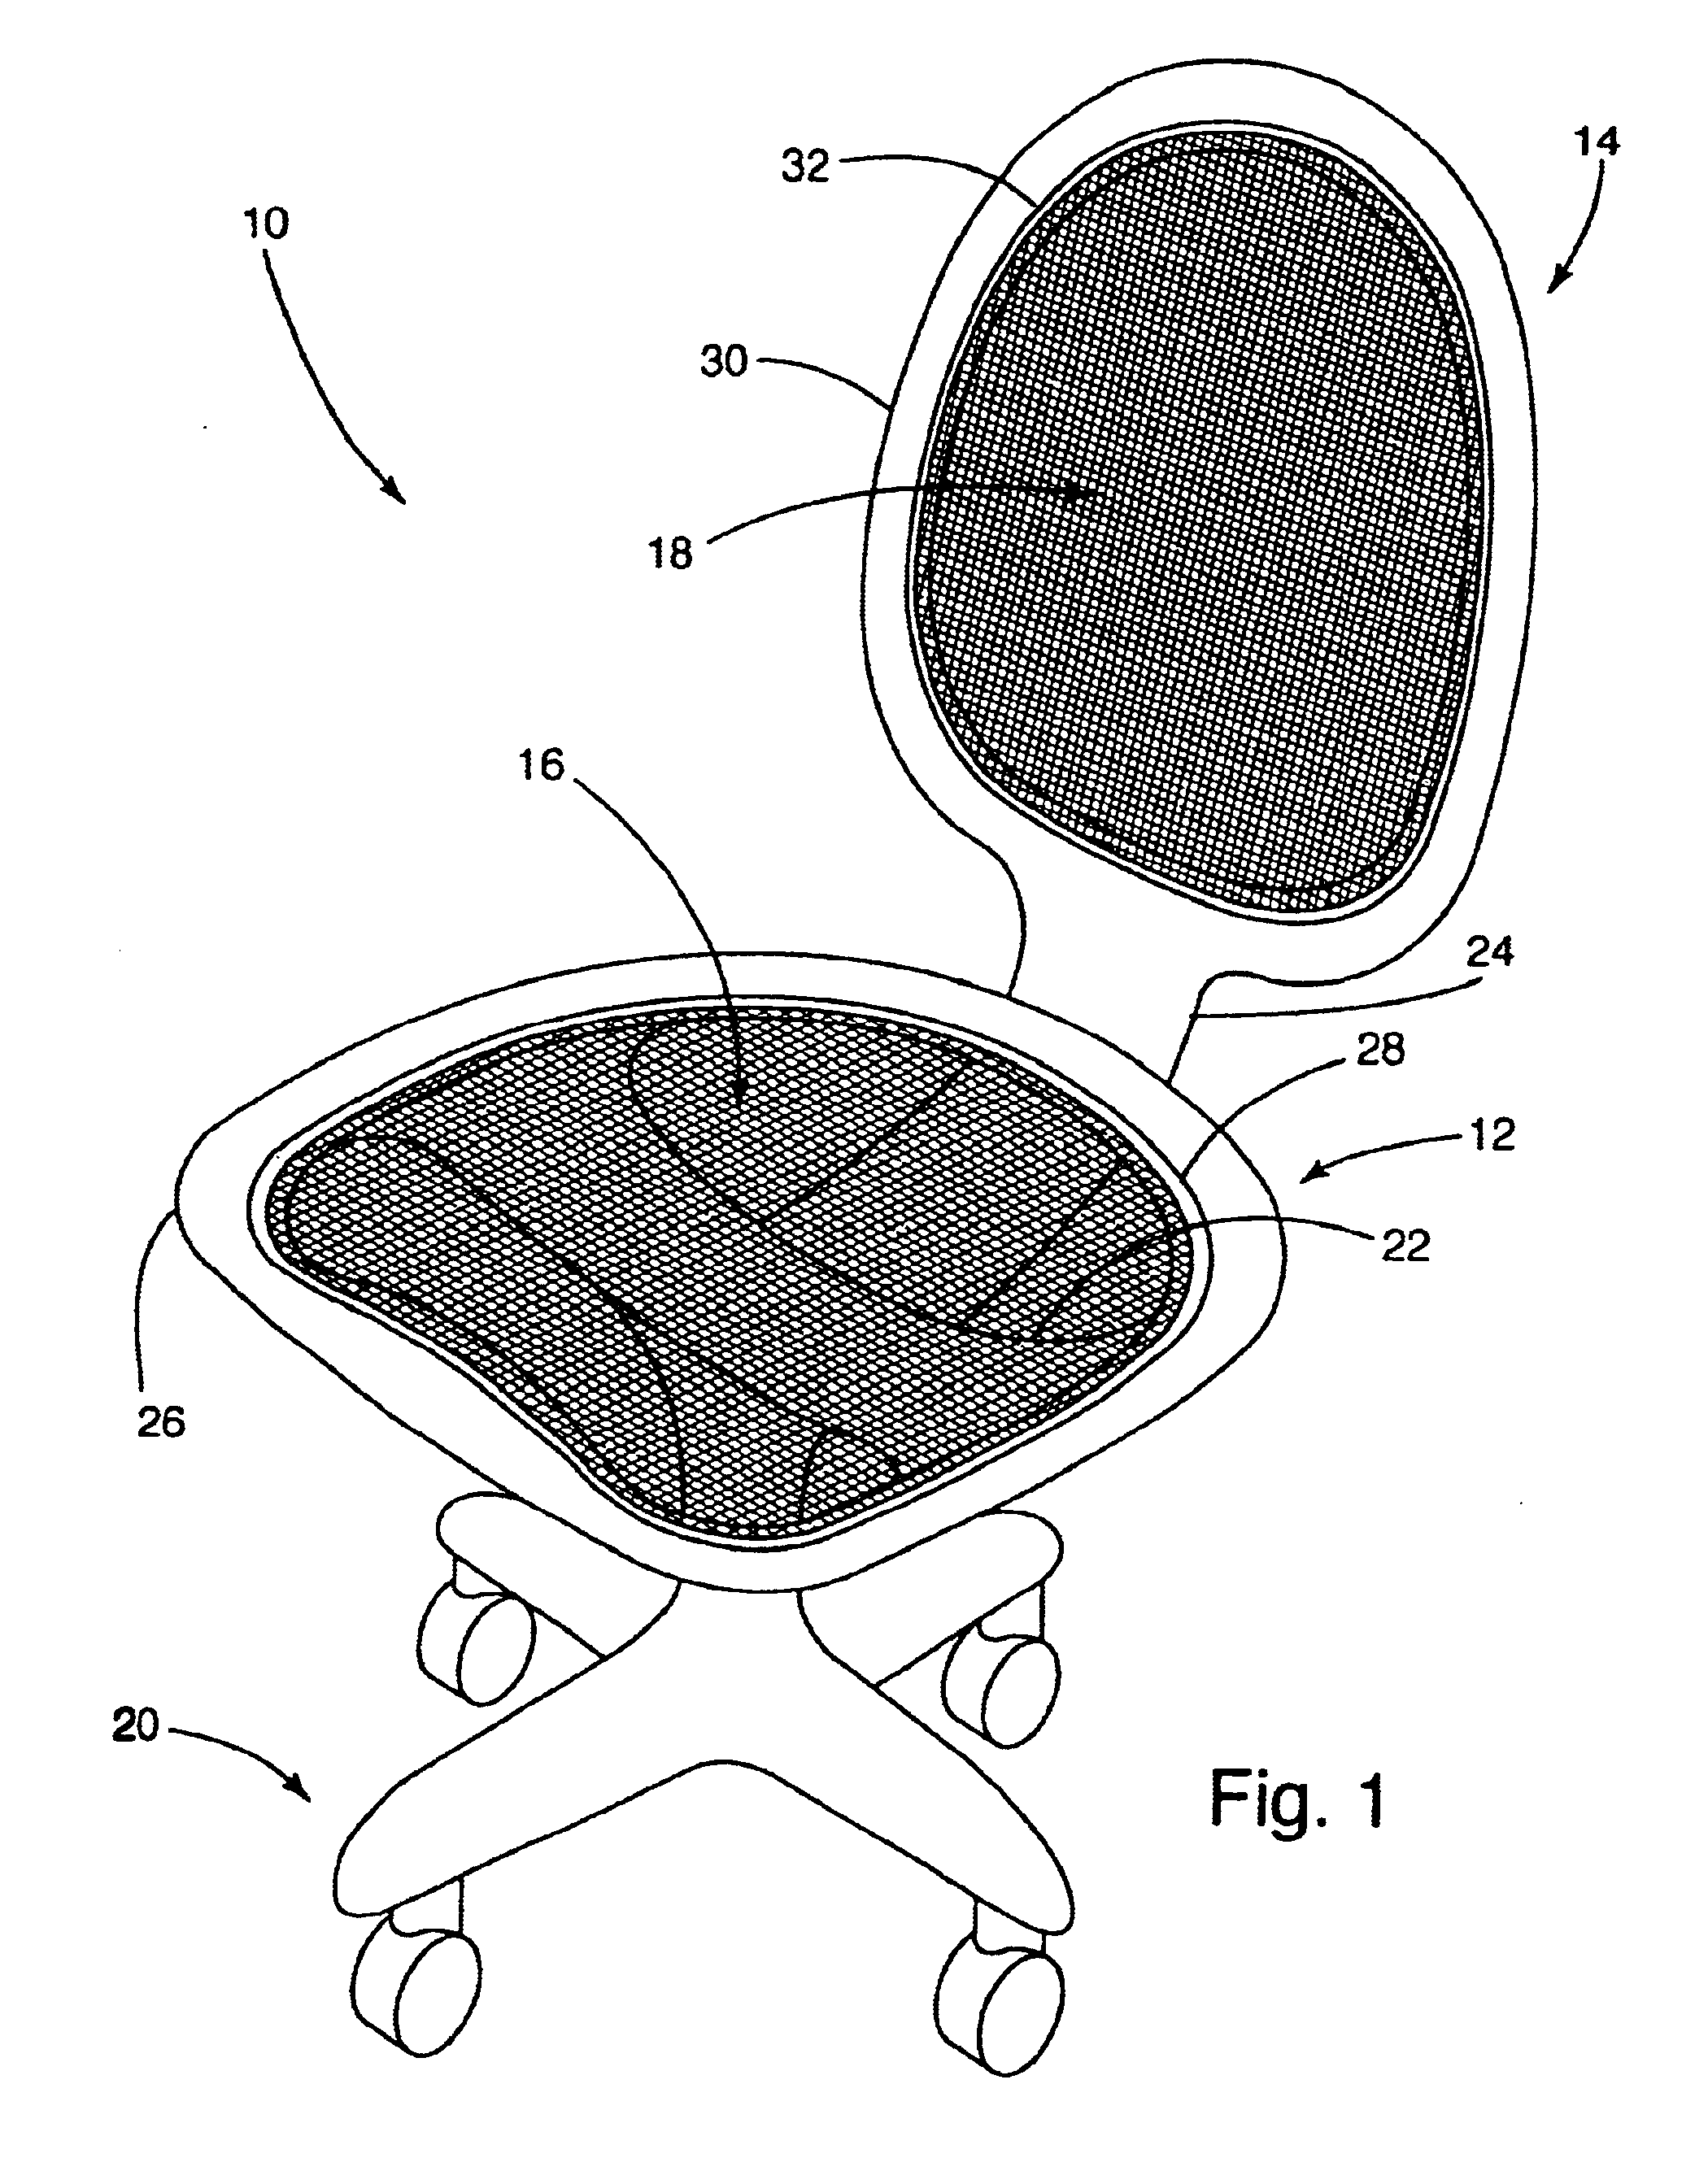 Carrier and attachment method for load-bearing fabric